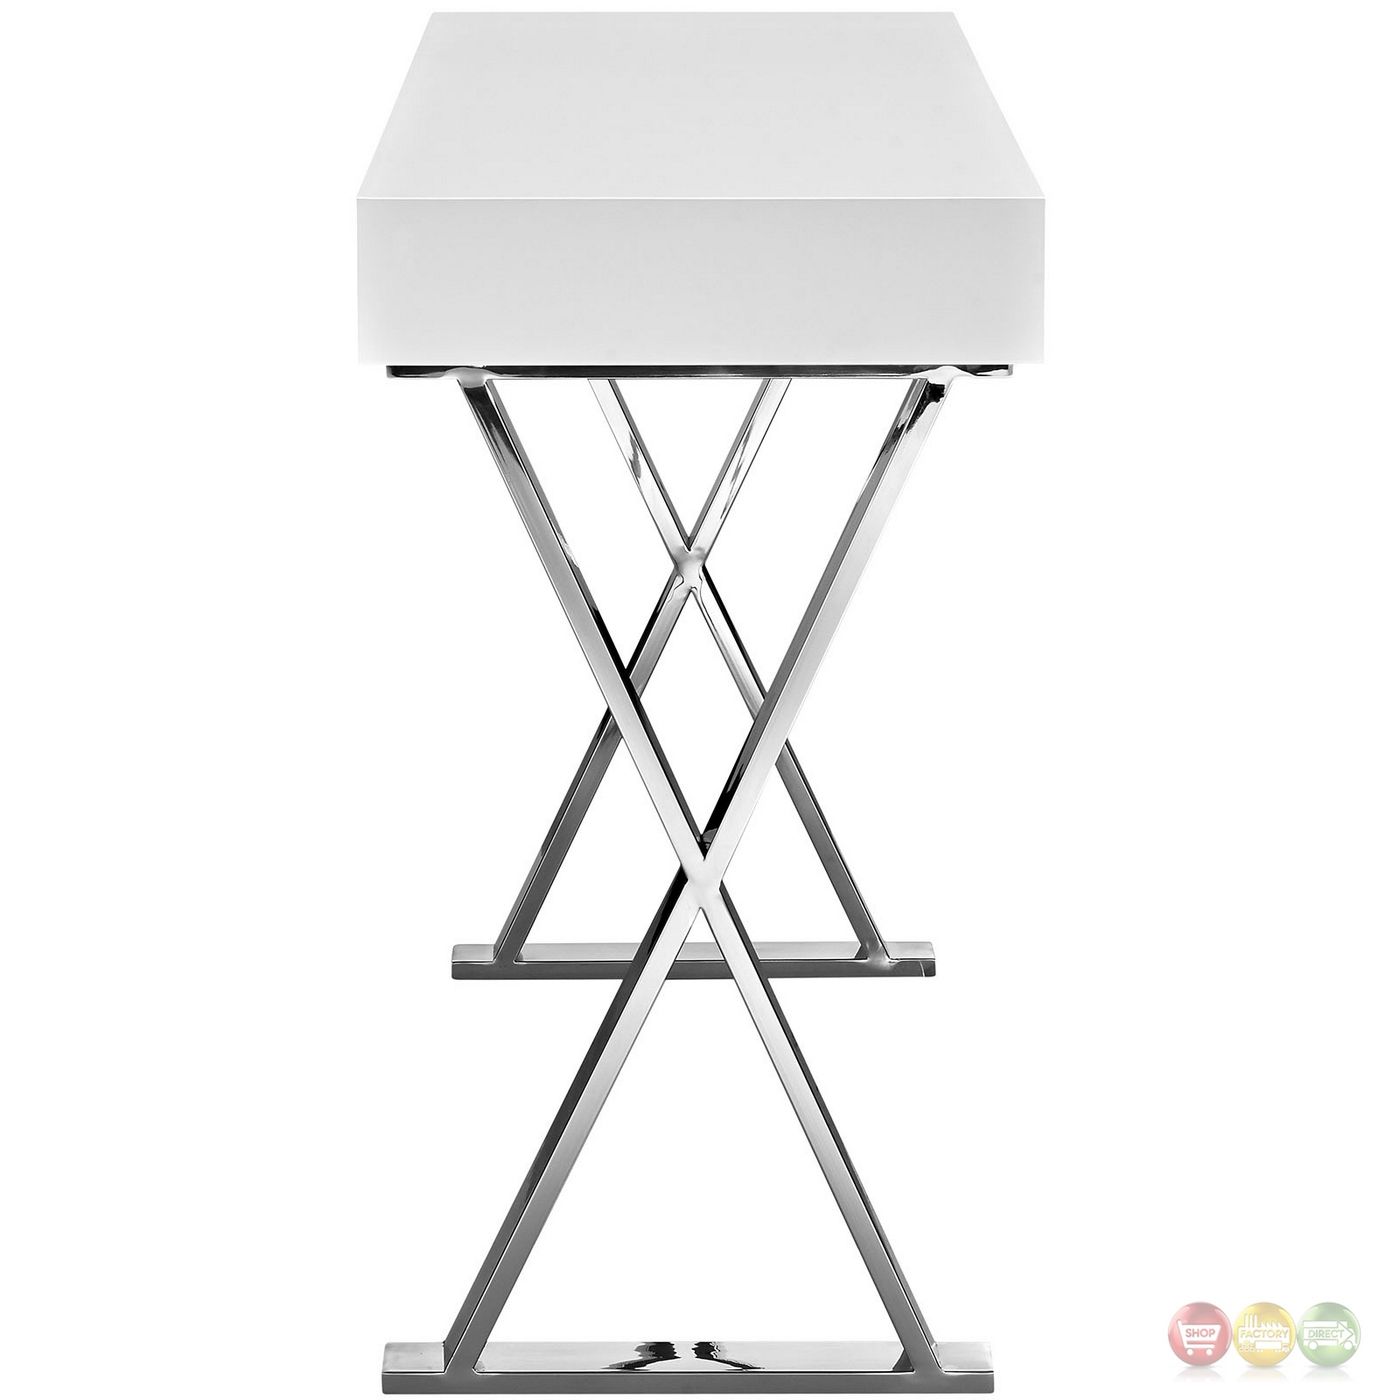 Sector Modernistic Console Table With High Gloss Top & Chrome Base, White Regarding Gloss White Steel Console Tables (View 15 of 20)